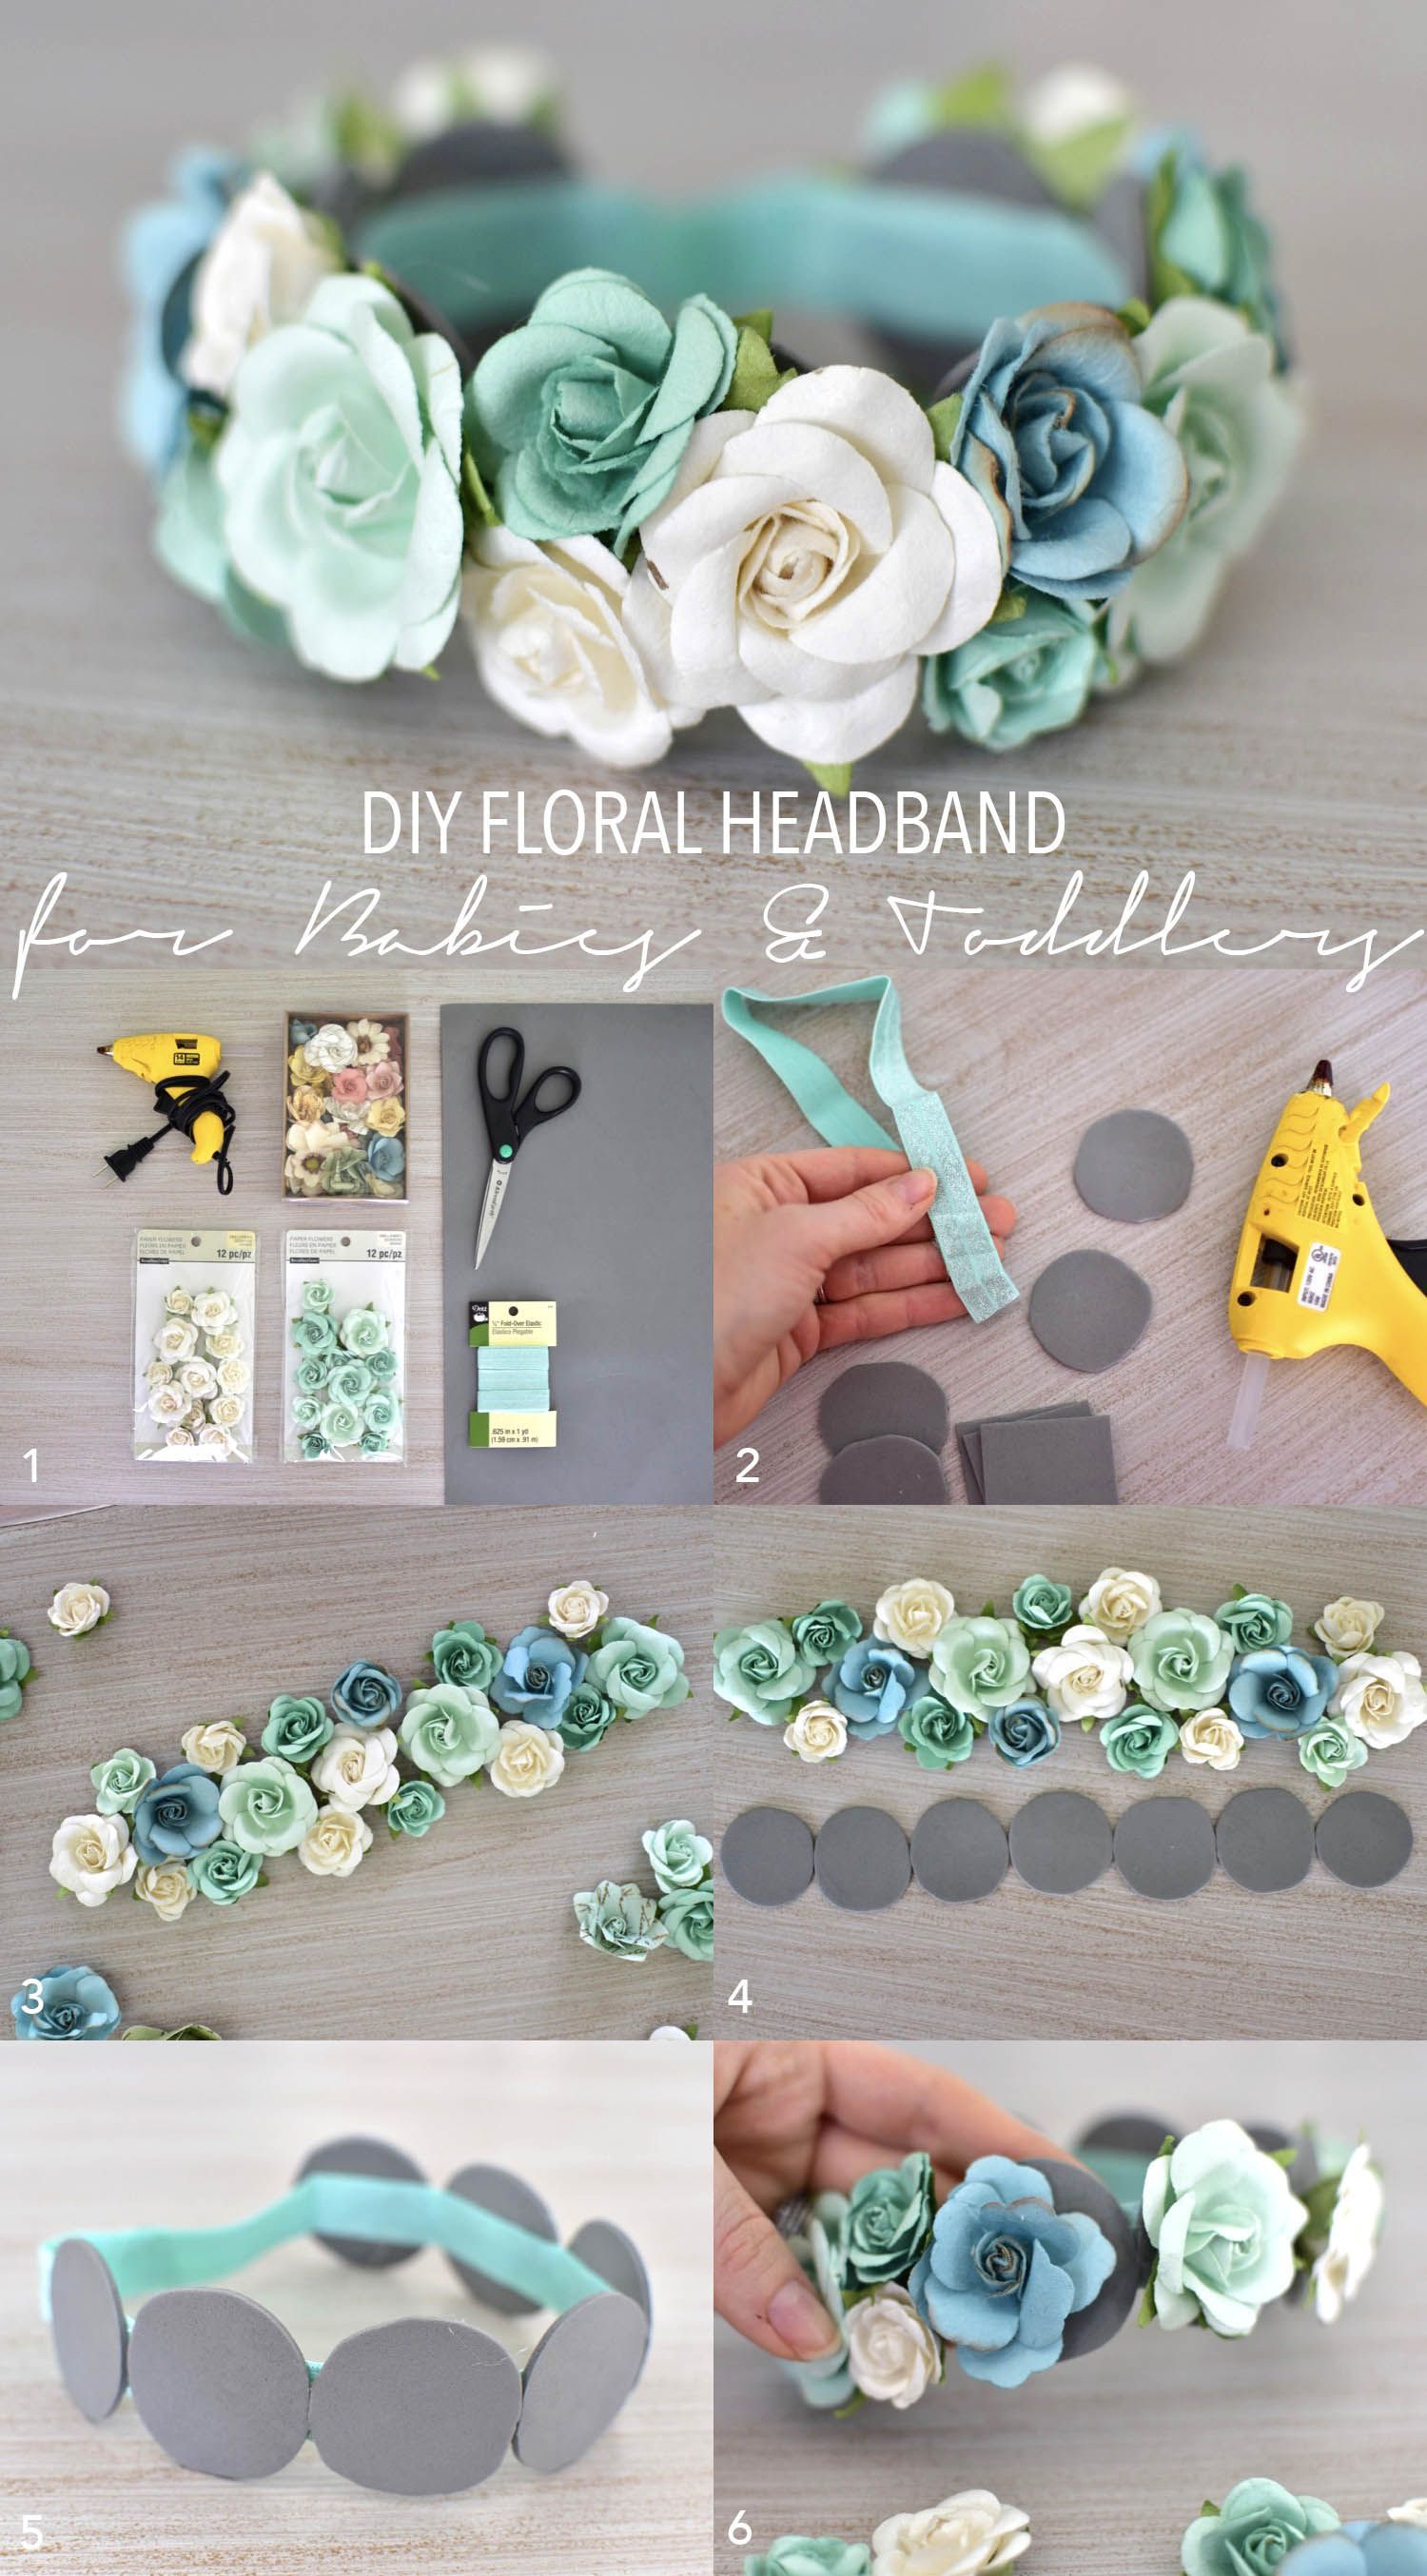 DIY Floral Headband for Babies and Toddlers • theStyleSafari - DIY Floral Headband for Babies and Toddlers • theStyleSafari -   17 diy Baby headbands ideas